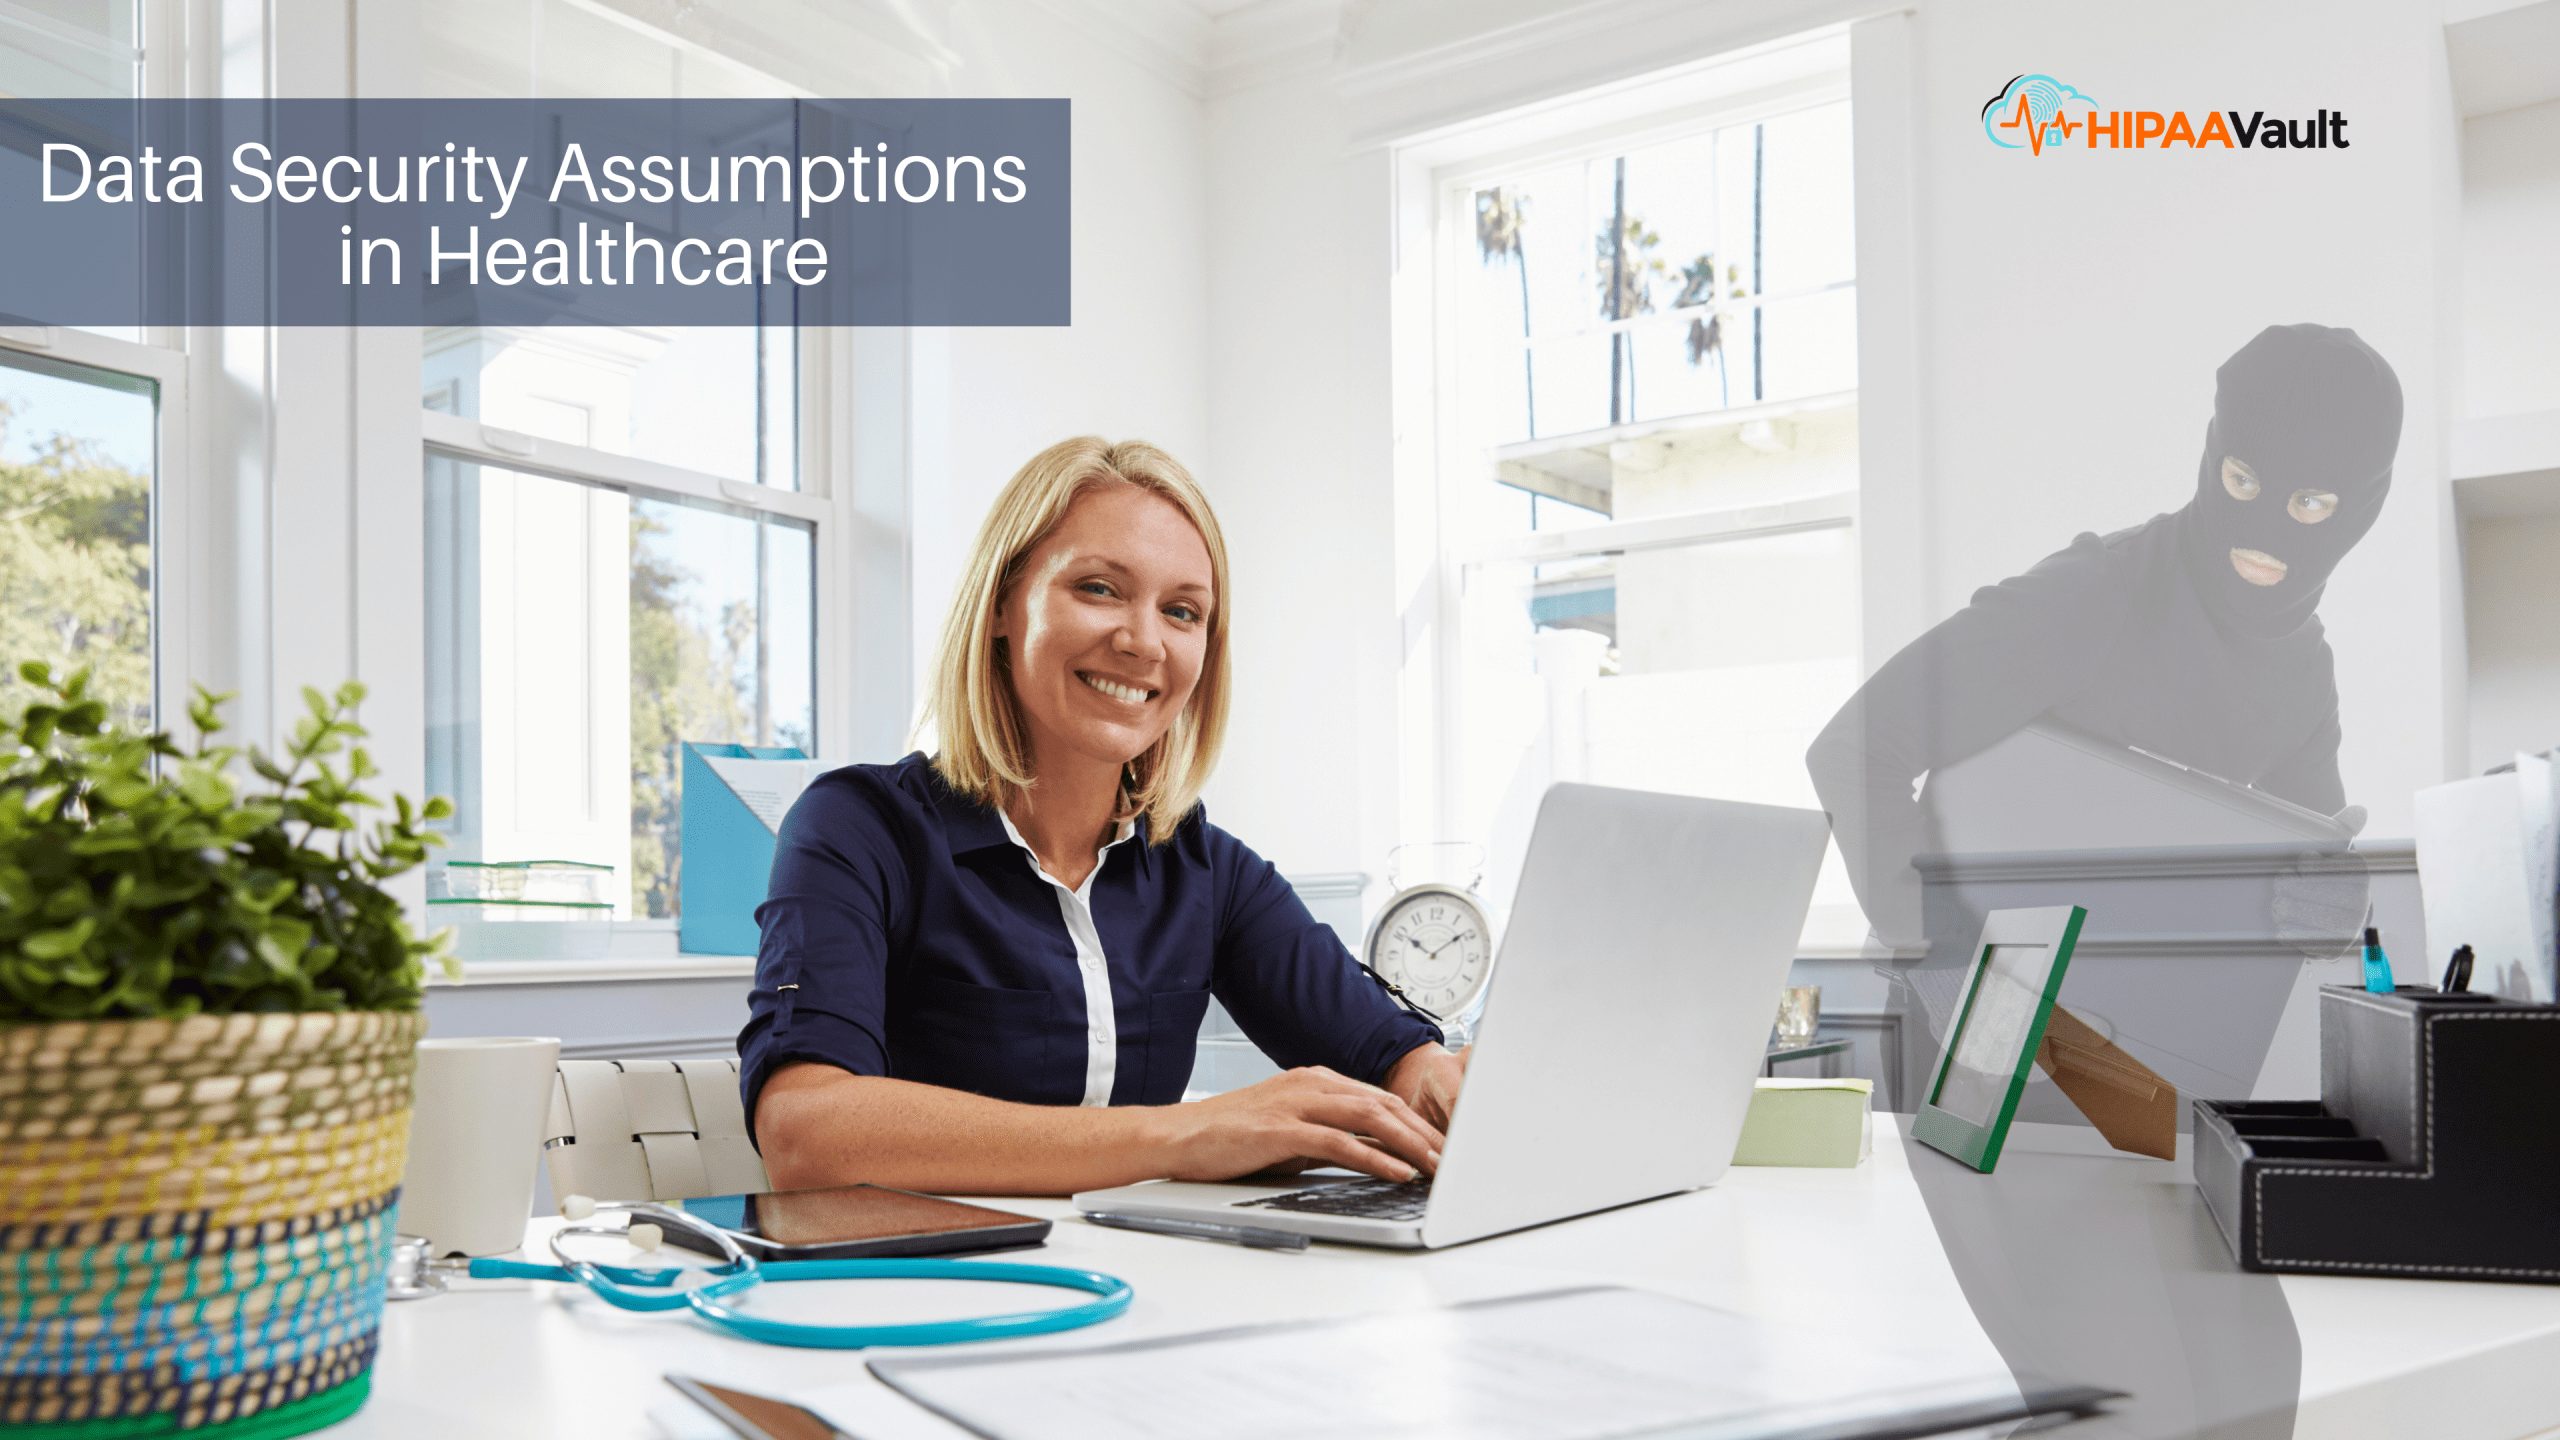 Data Security Assumptions in Healthcare